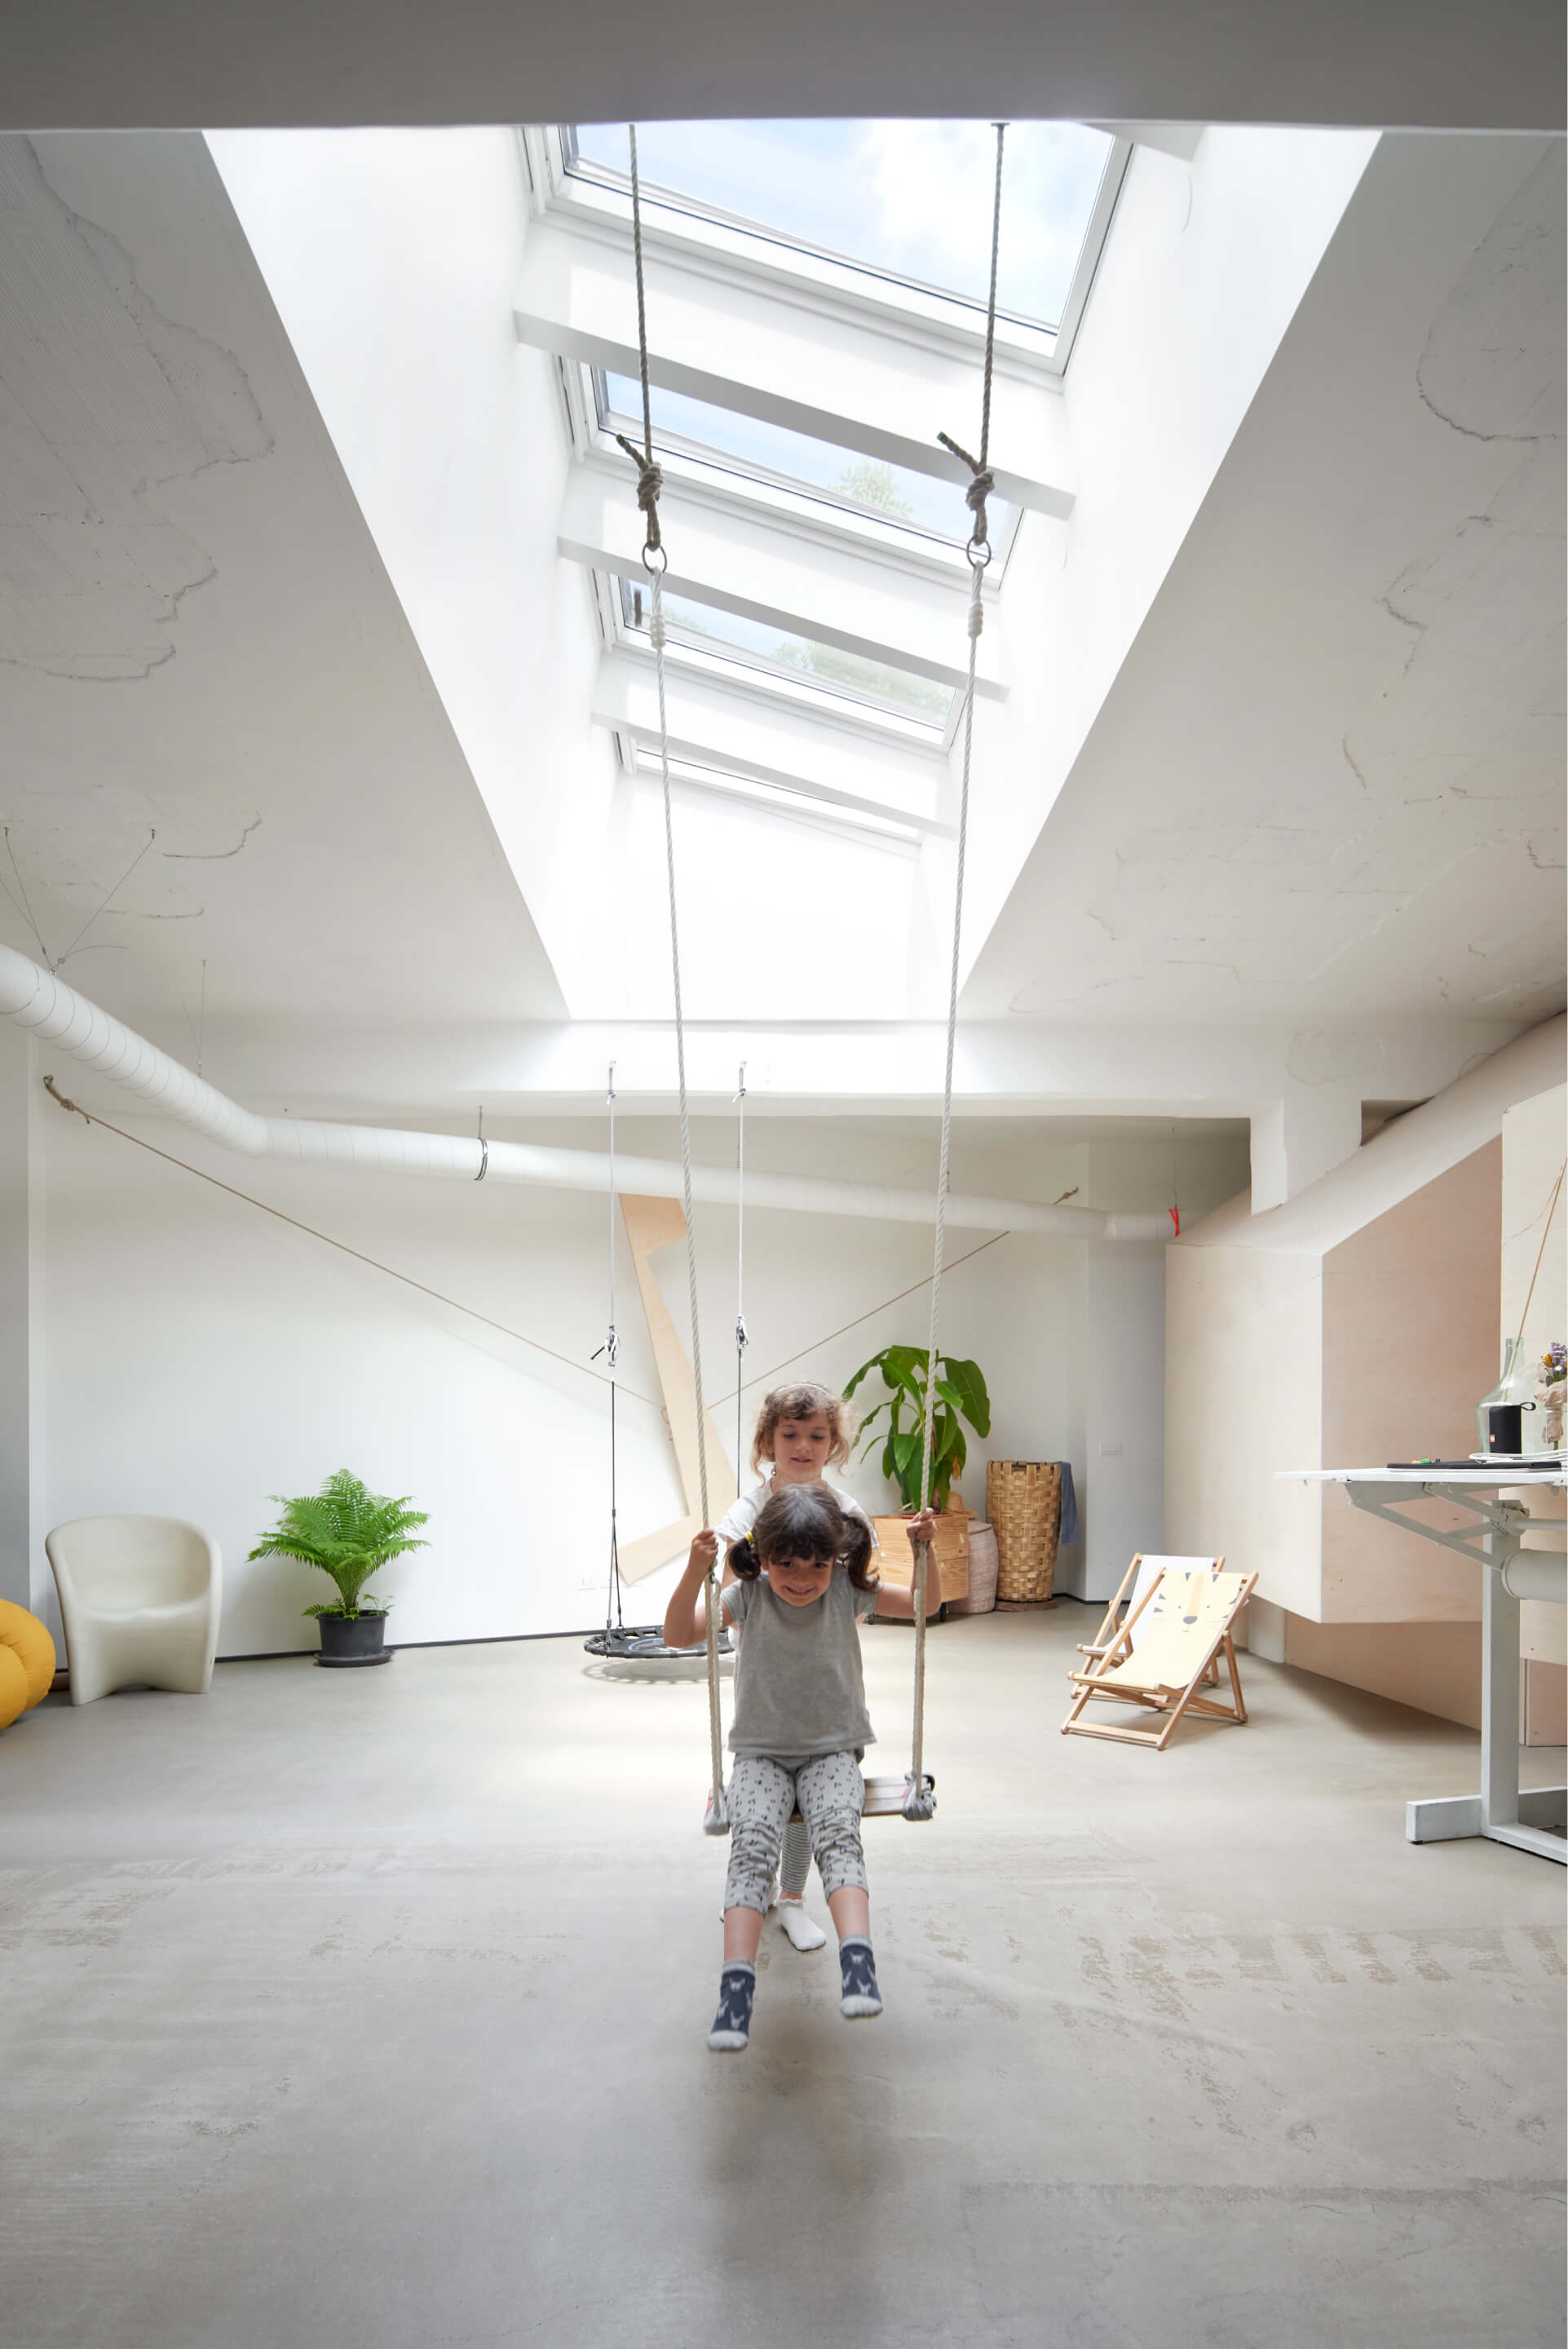 Room with lot of lights and roof windows with children playing